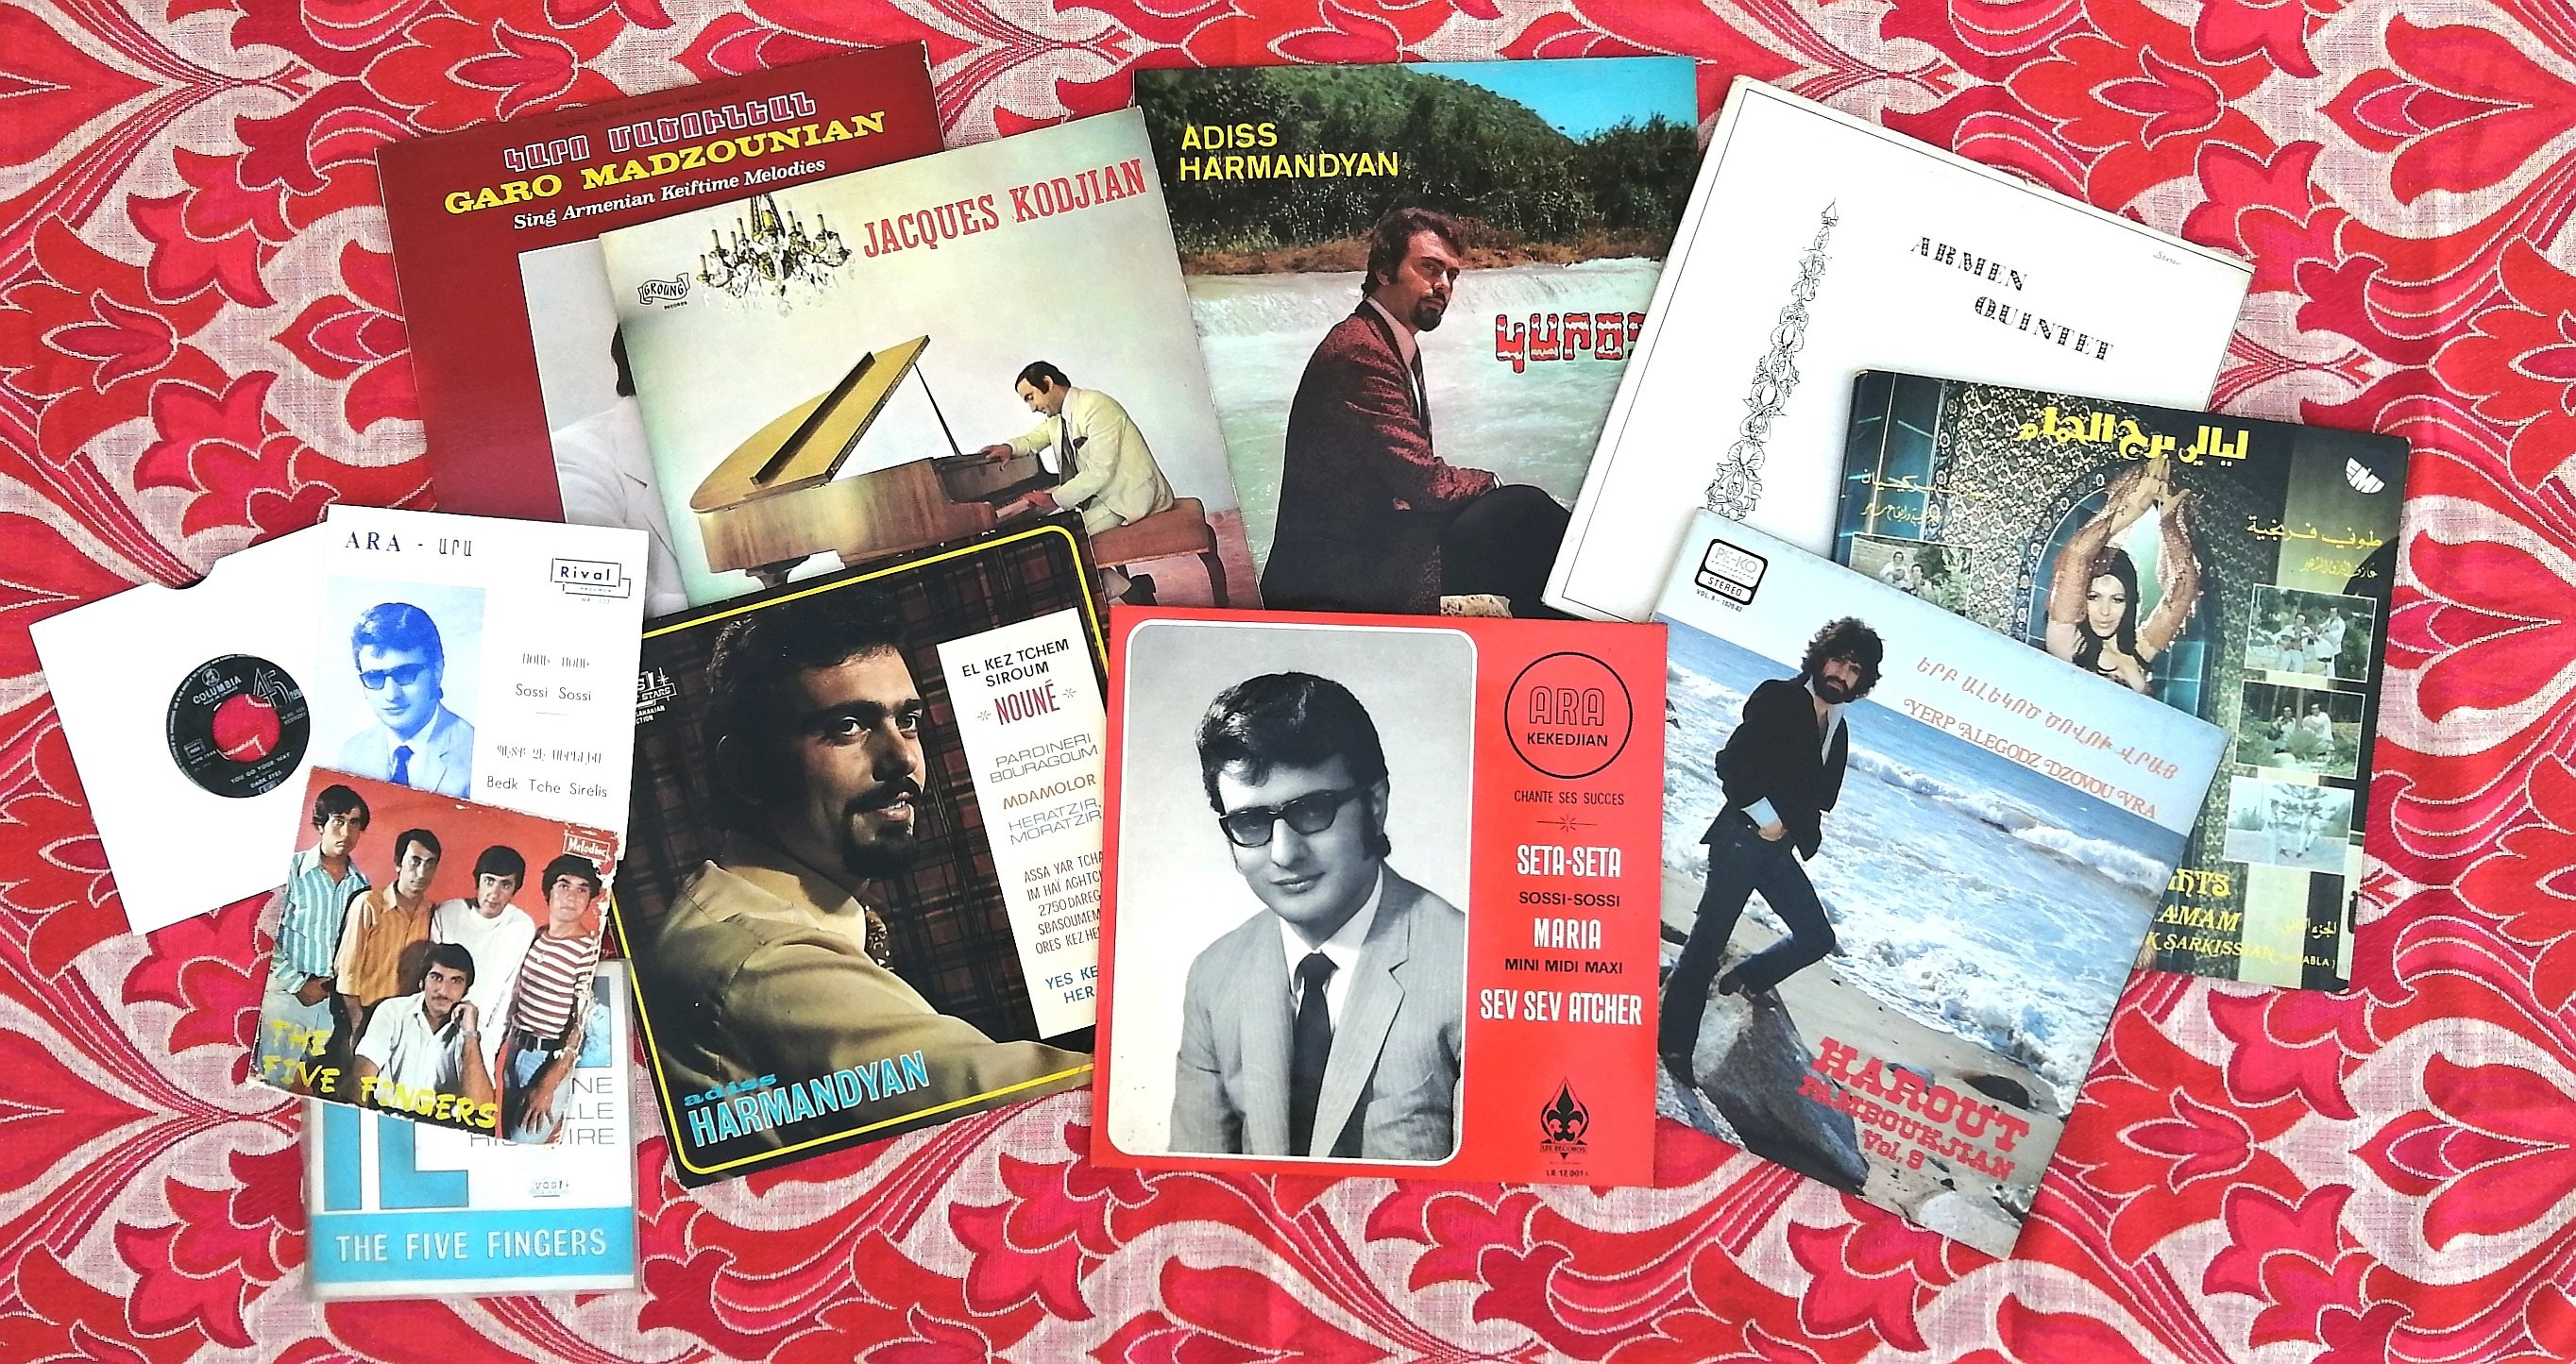 Armenian language pop music or estraydin became popular in the 1970s (Credit: Natalie Shooter)